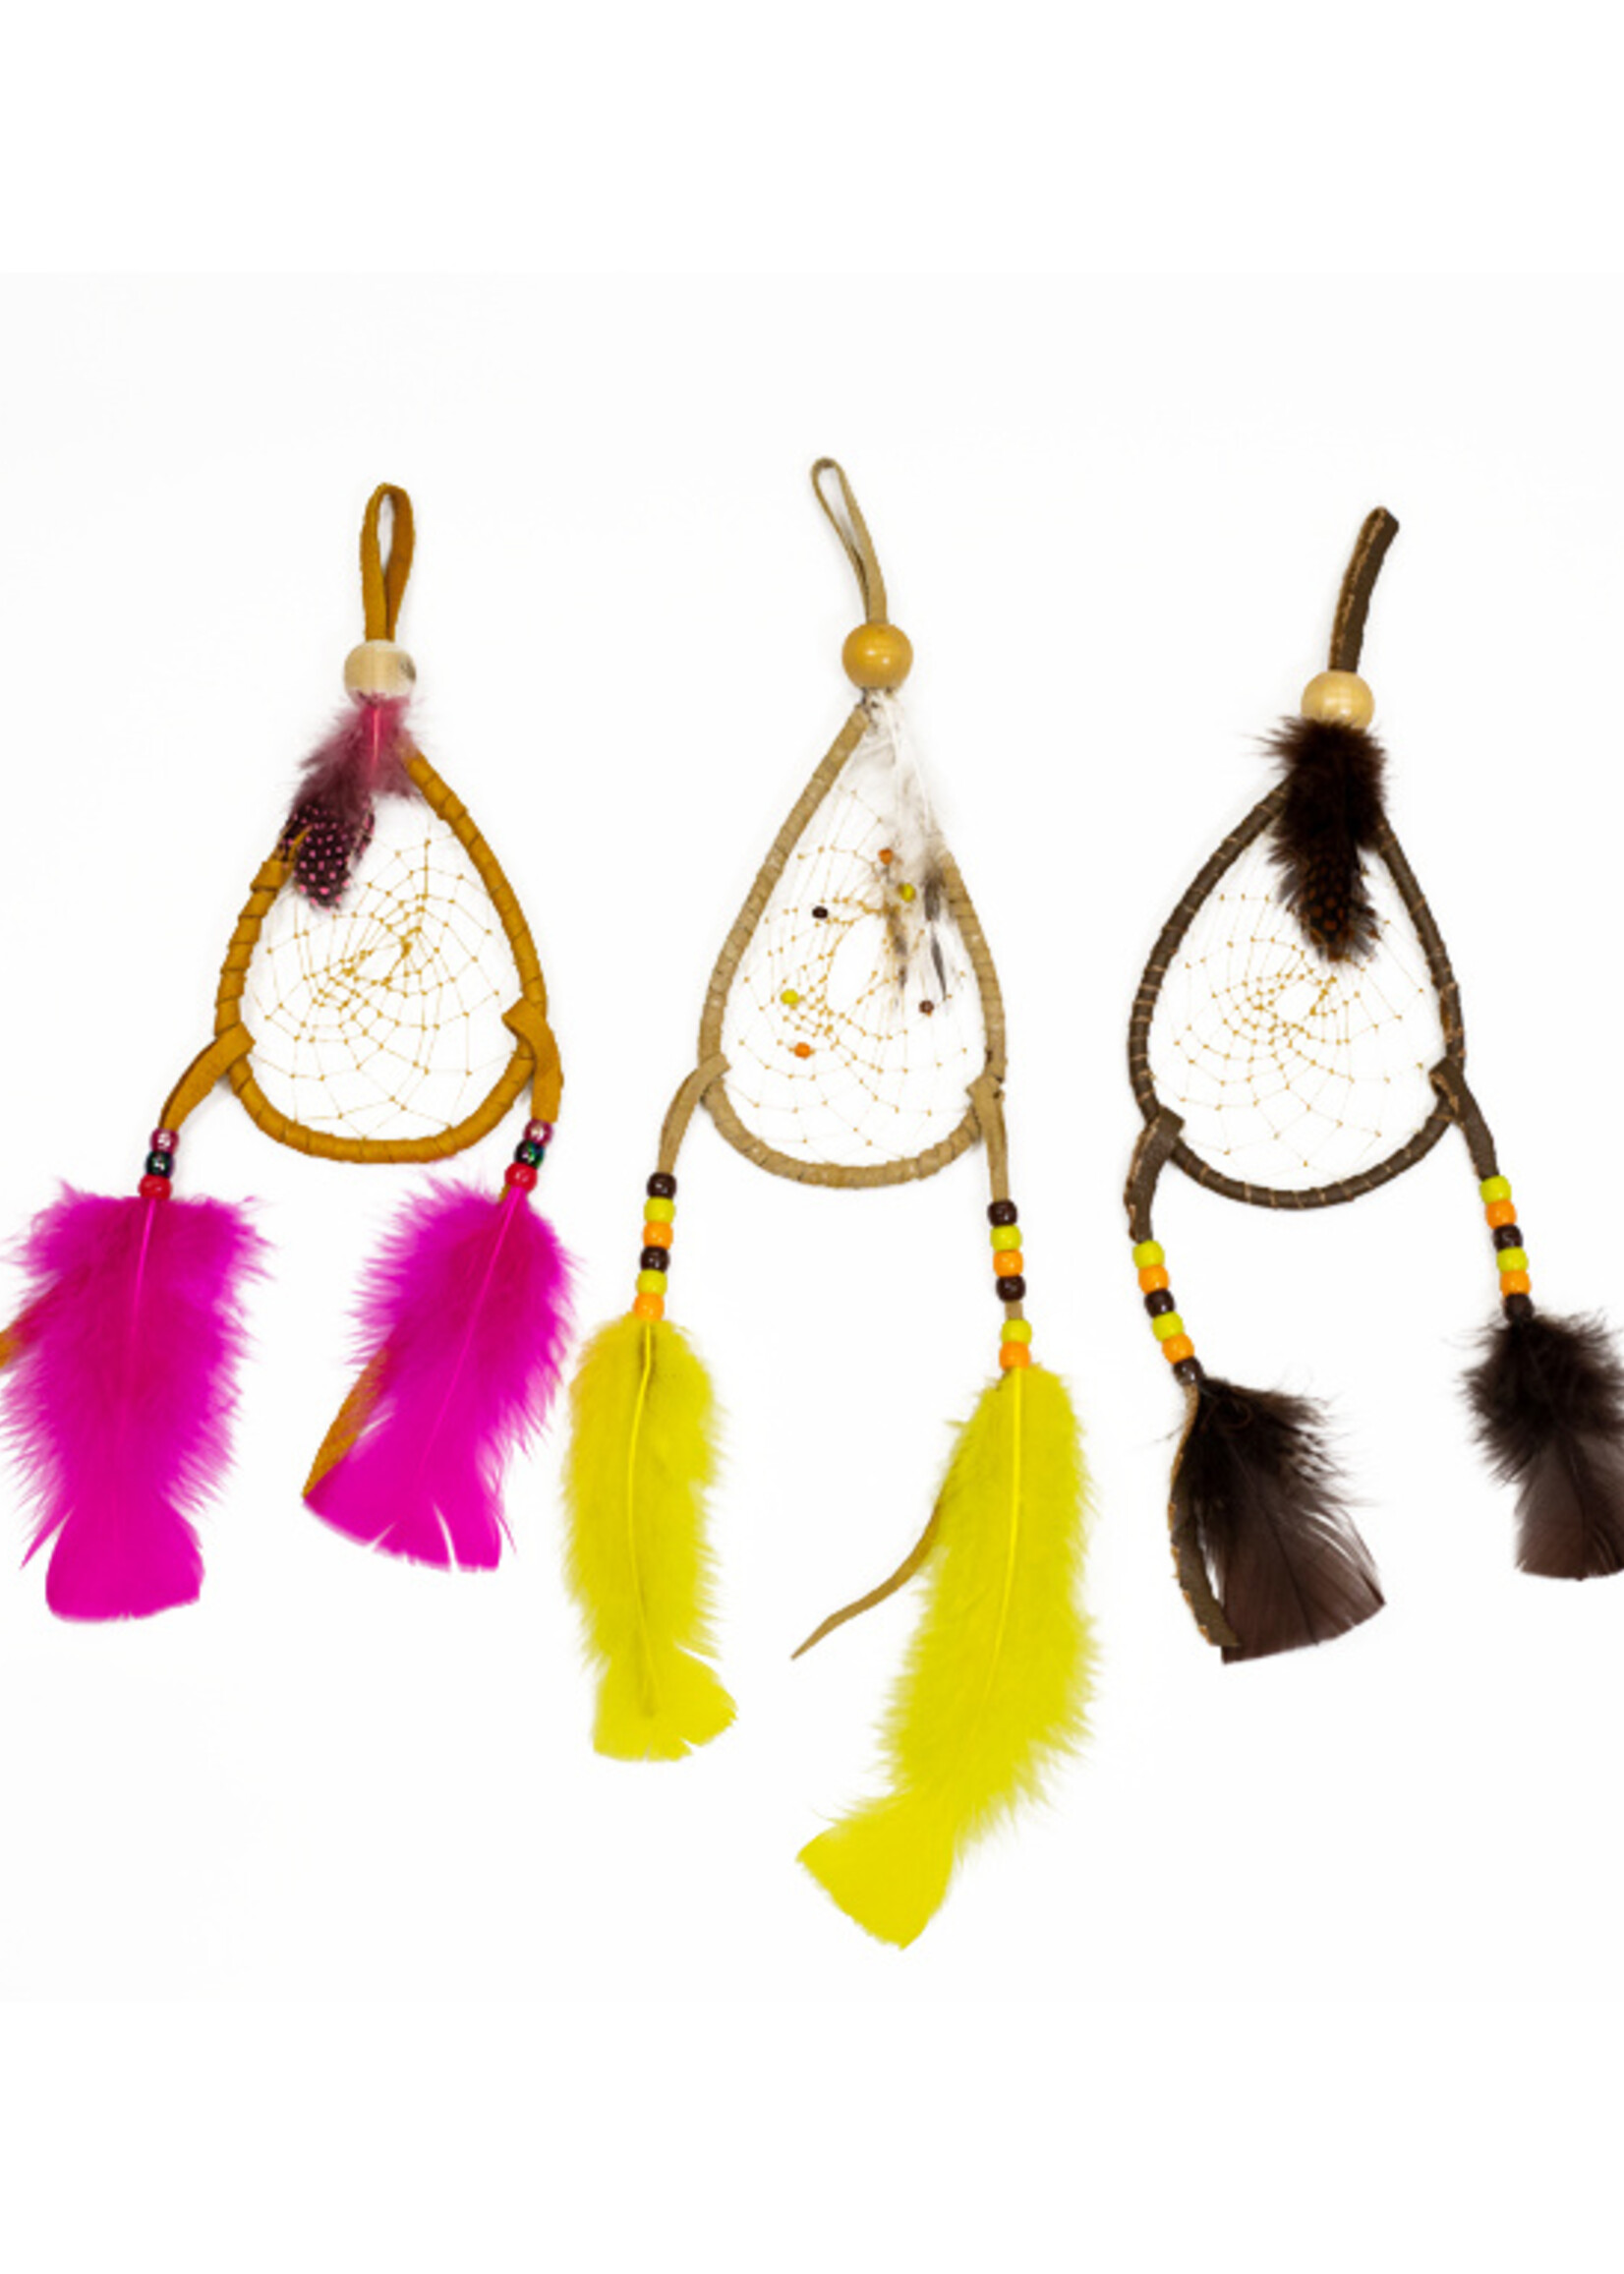 *JS Oval Shape Dream Catcher with Plume Fringes 3 X 5 1/2